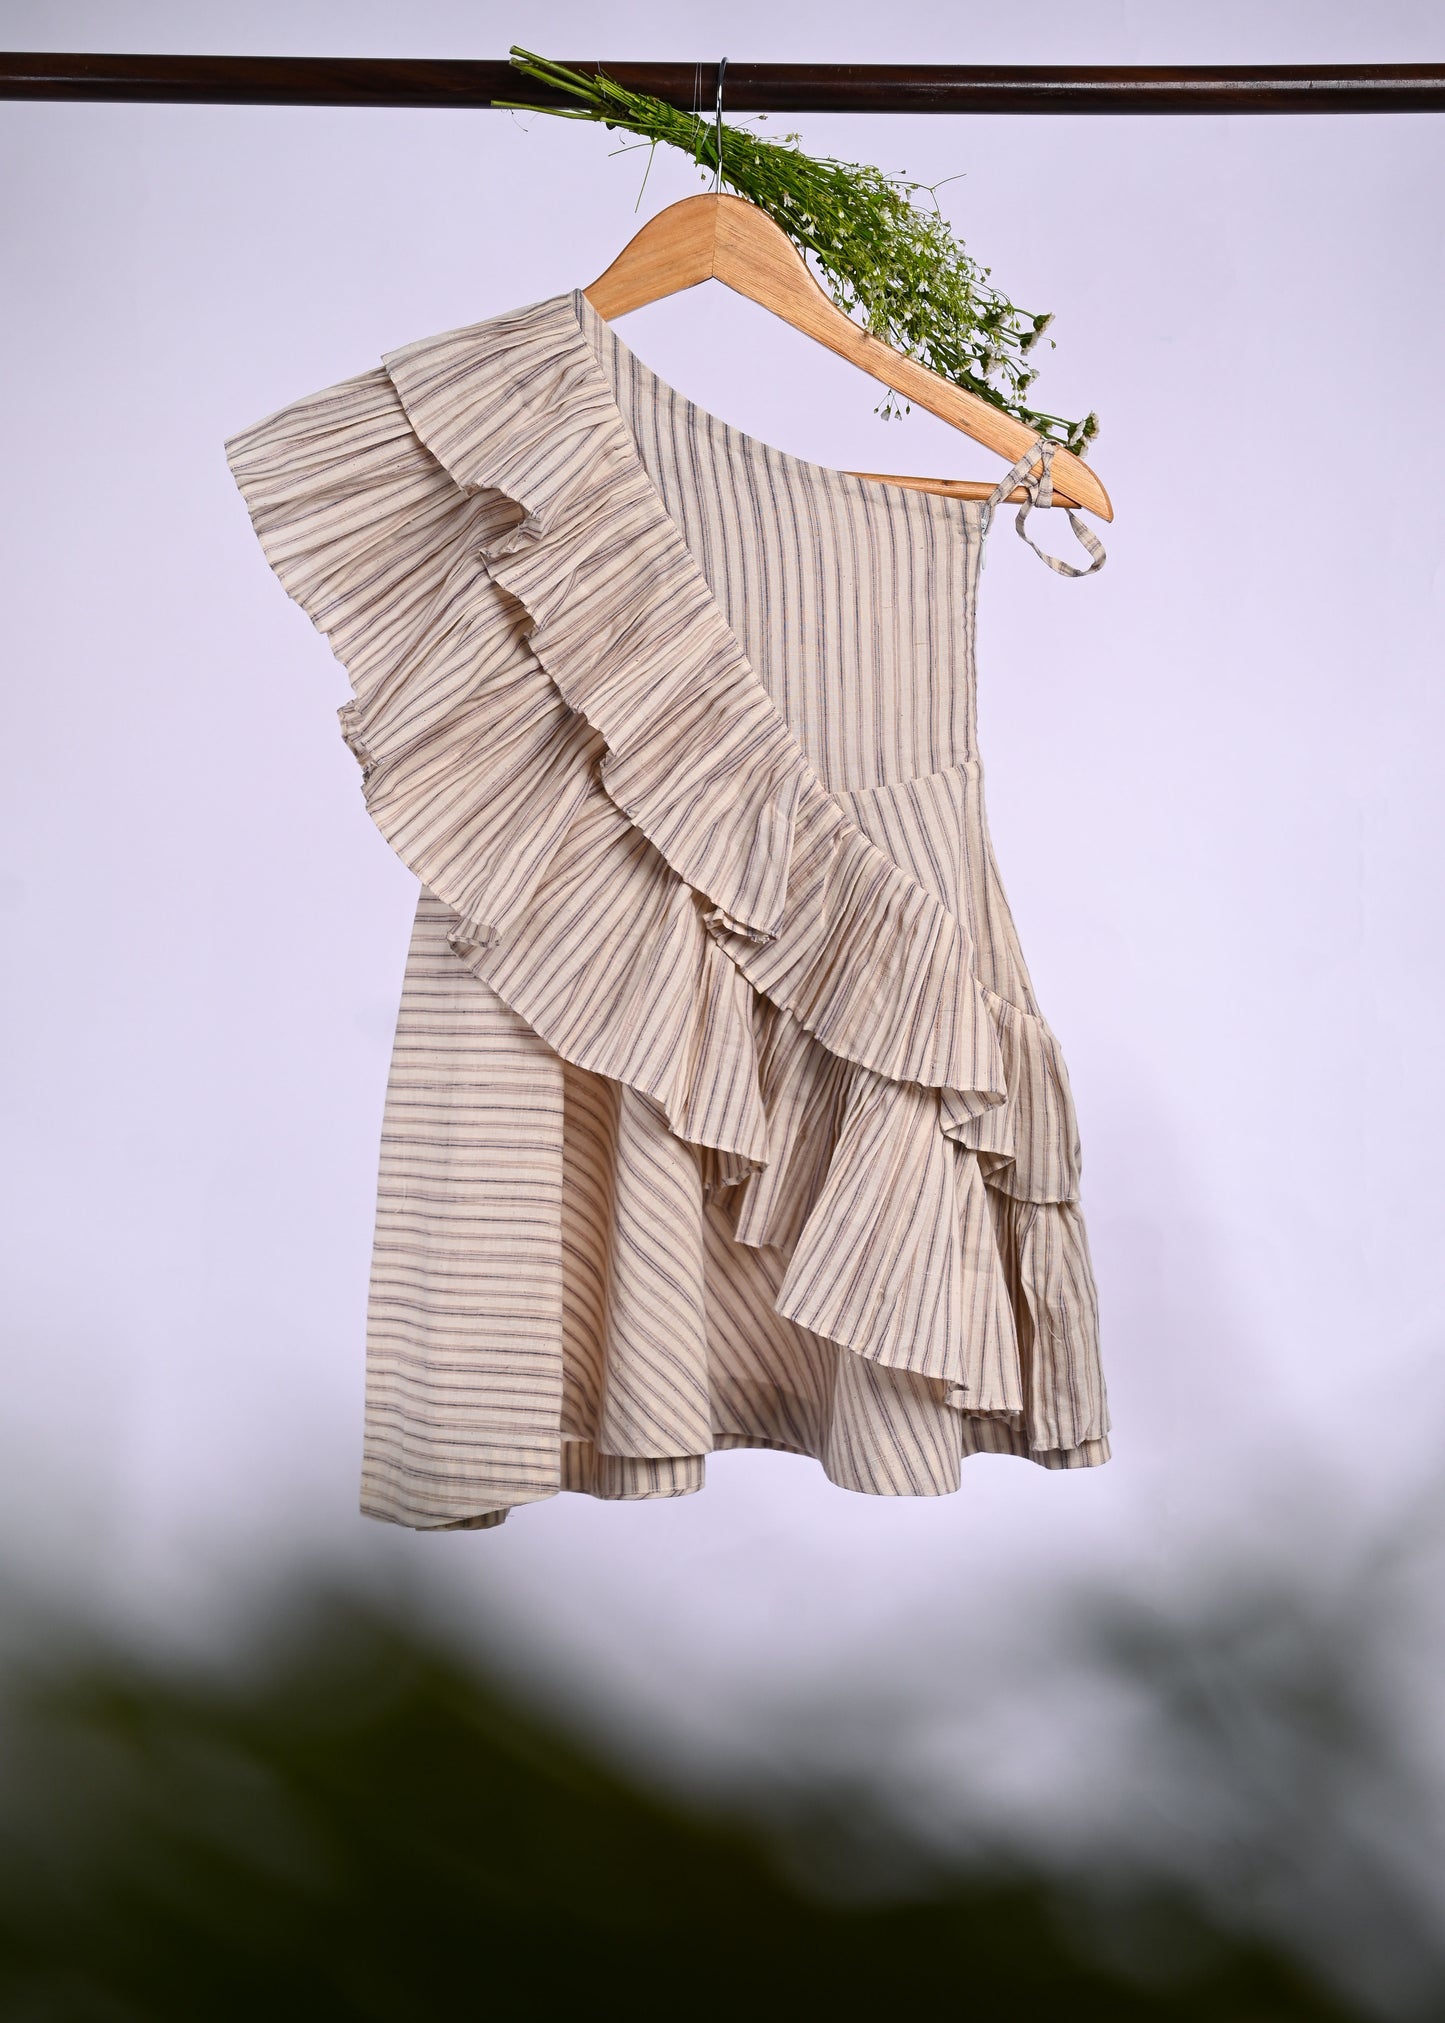 Handspun Handwoven Flutterbutter Organic Cotton Dress for Girls | Sustainable Baby Organic Clothing | Dyed with Herbal Extracts | 100% Organic Cotton Kids Clothing  | ORA Organic India